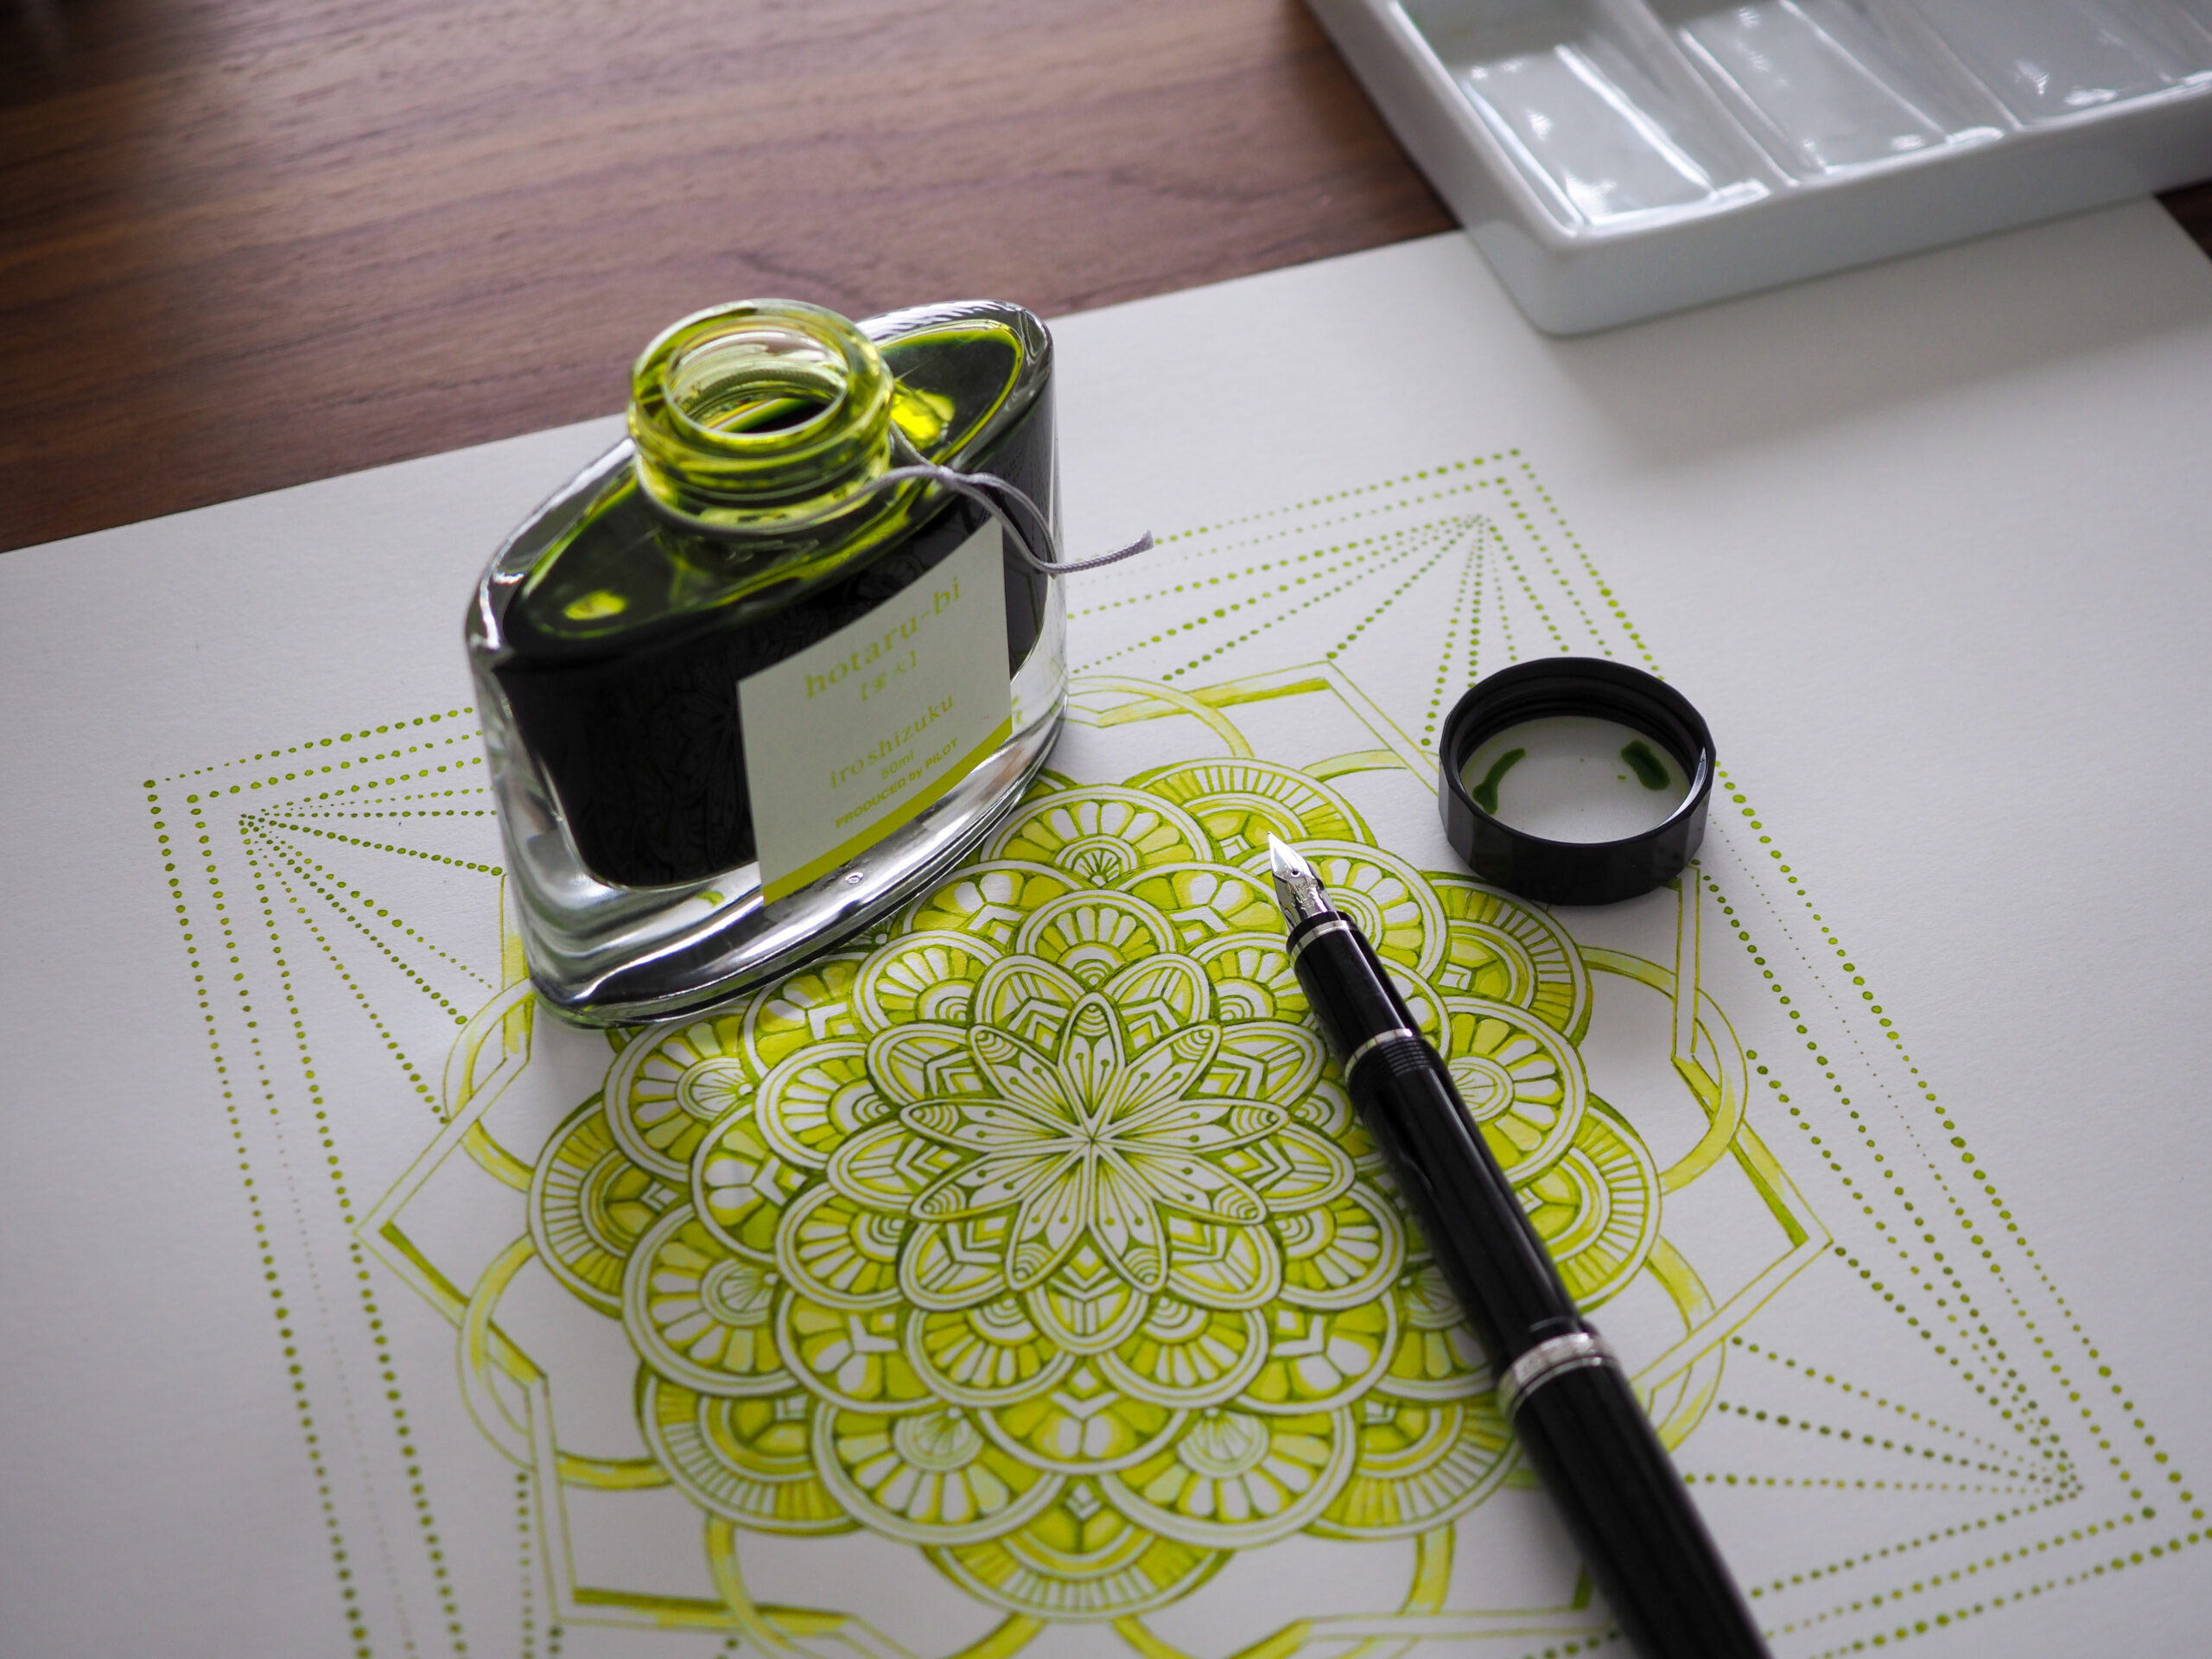 Pilot Falcon fountain pen and Pilot iroshizuku ink in yellow-green, called hotaru-bi, which translates to Firefly Glow in Japanese,  used to draw mandala for therapeutic benefit